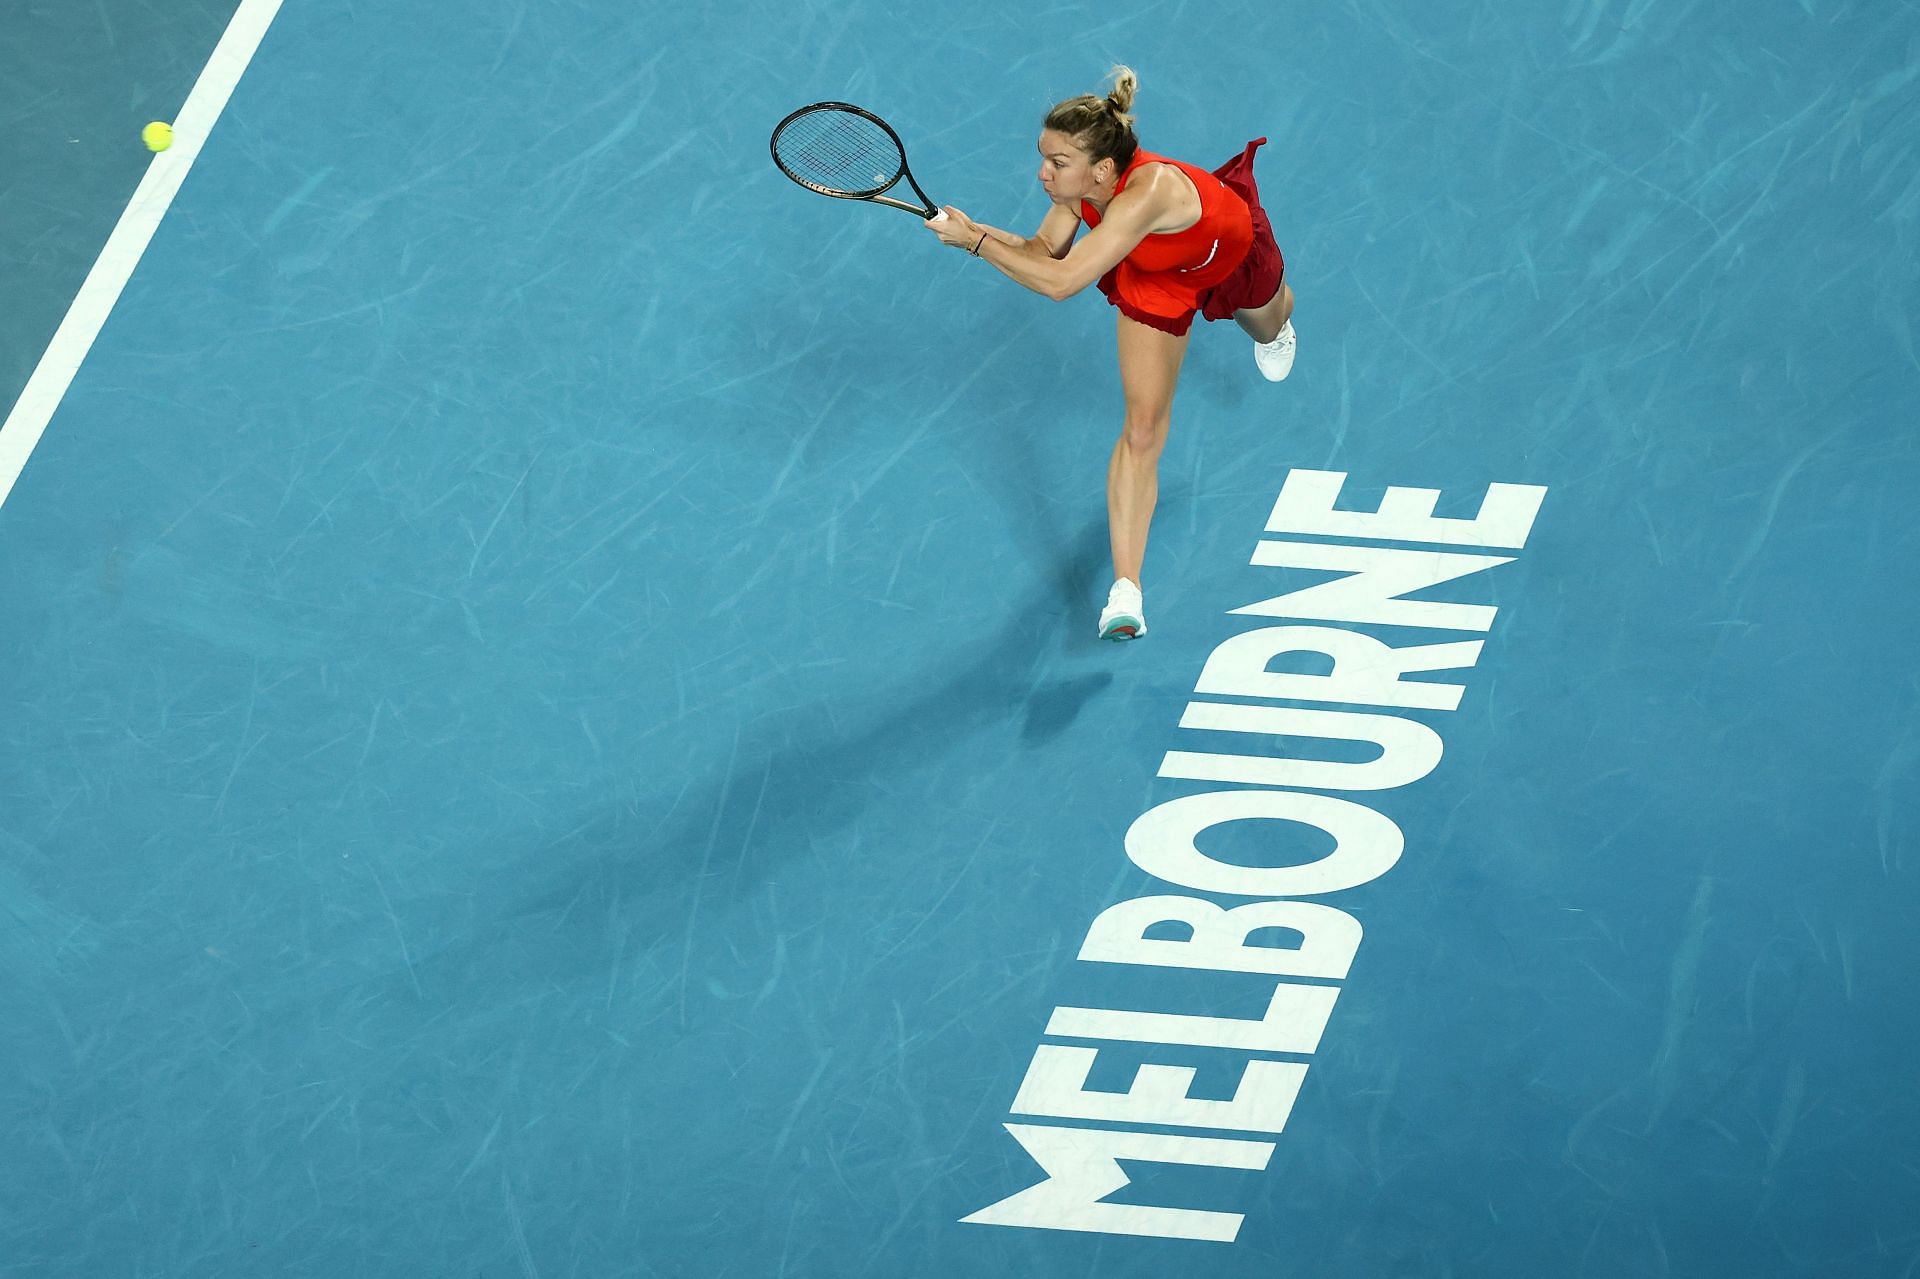 Australian Open 2022 Schedule Today TV schedule, start time, order of play, live stream details and more